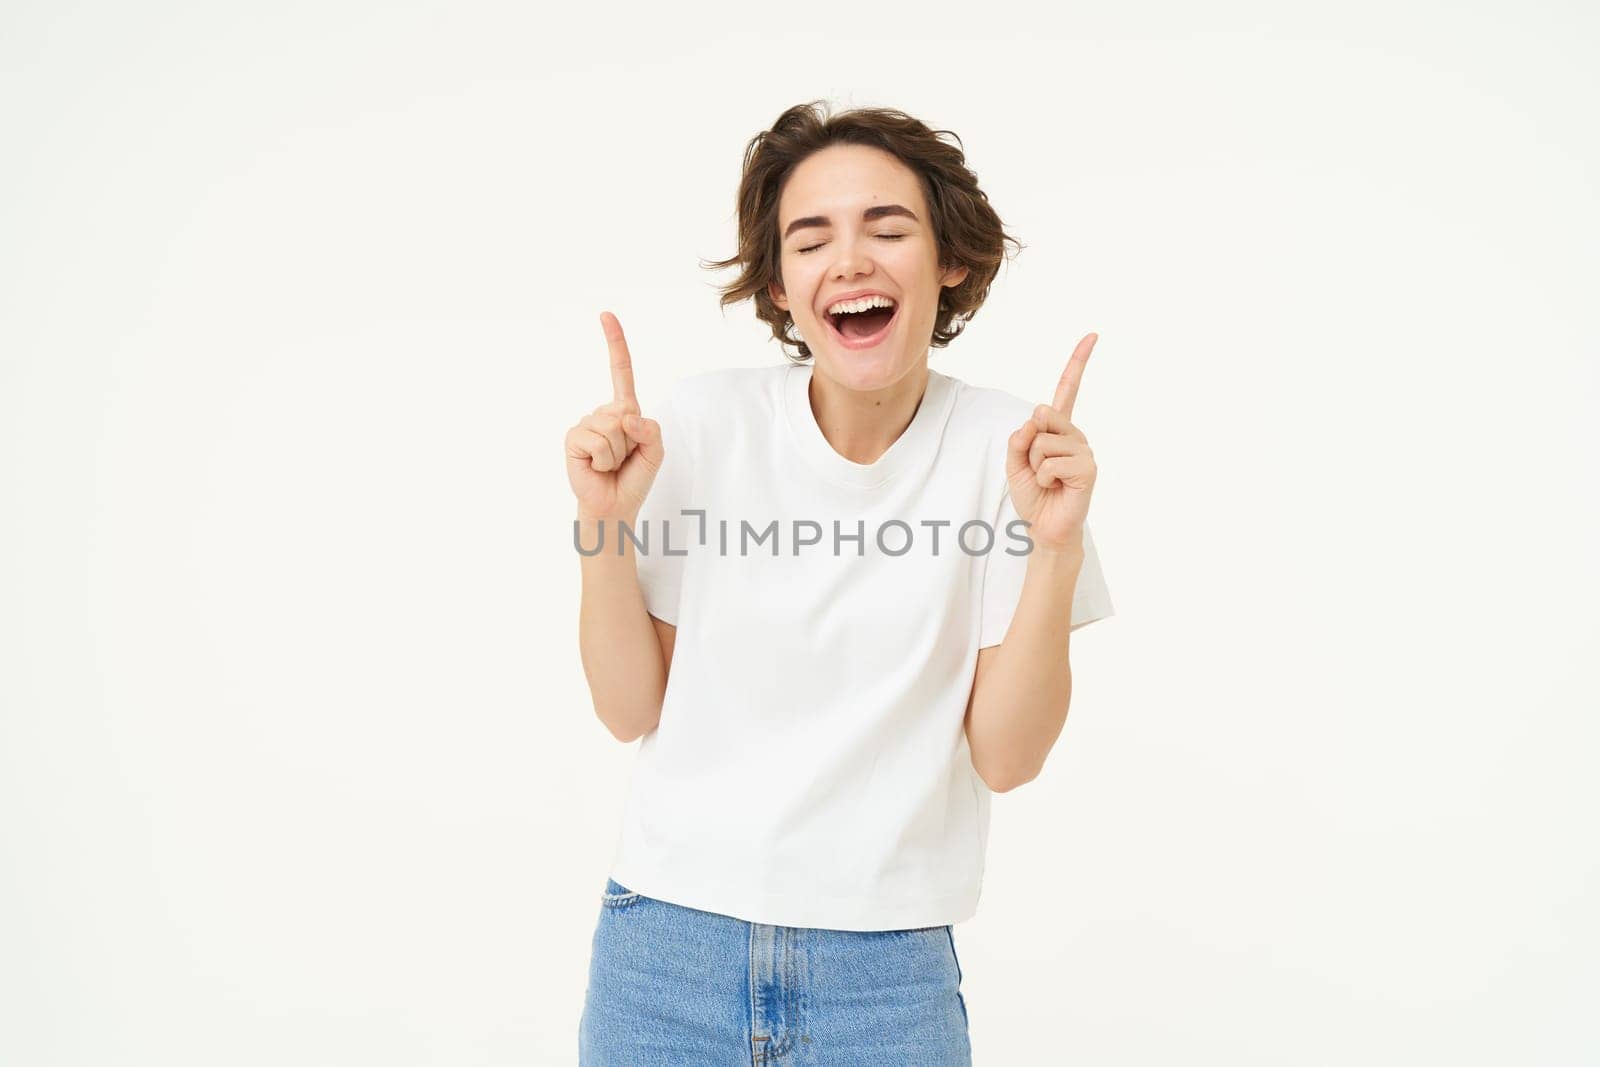 Image of carefree girl, laughing and smiling, pointing fingers up, showing promo offer, banner on top, posing over white studio background. Copy space